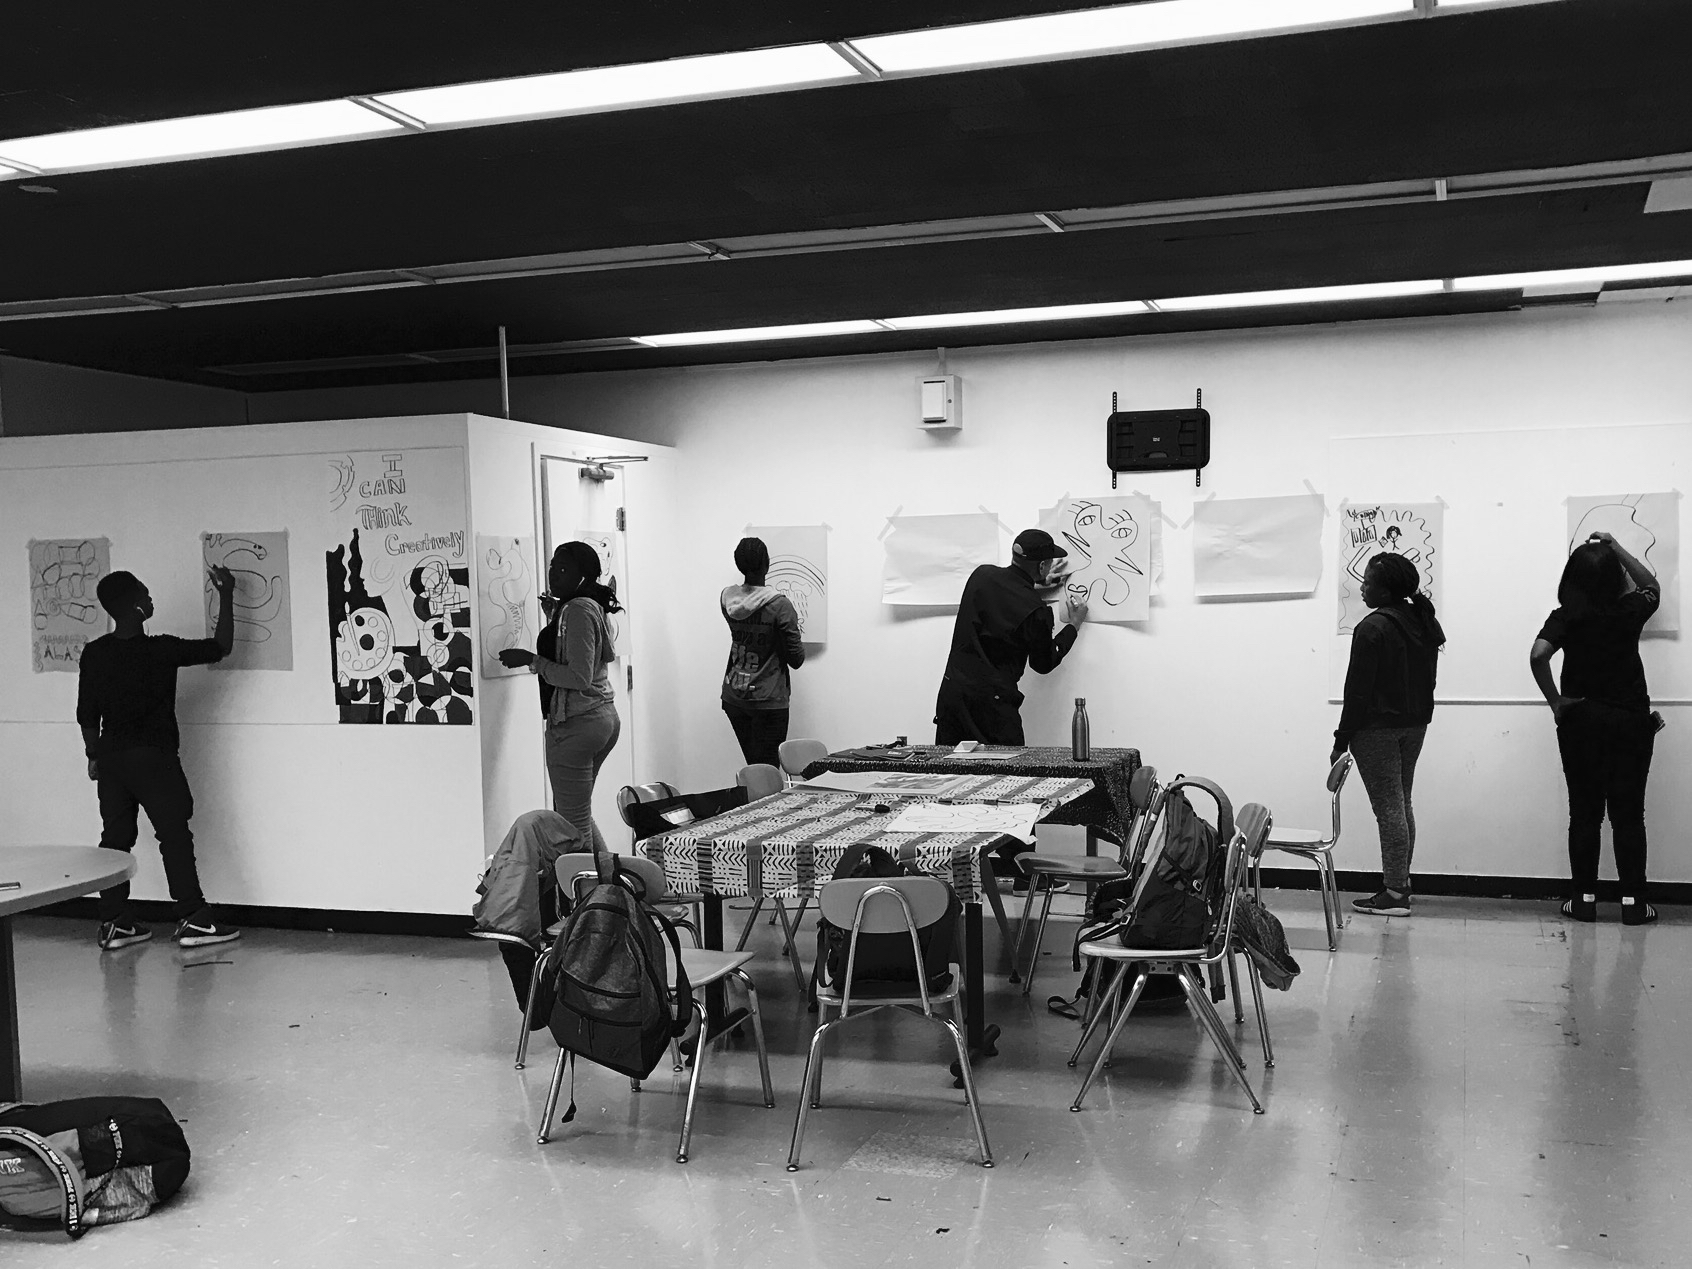 A black and white photo of an art exhibition where people are drawing on sheets of paper glued to the wall. Also in the middle of the room there is an empty table with chairs around it. On each chair there is a backpack.